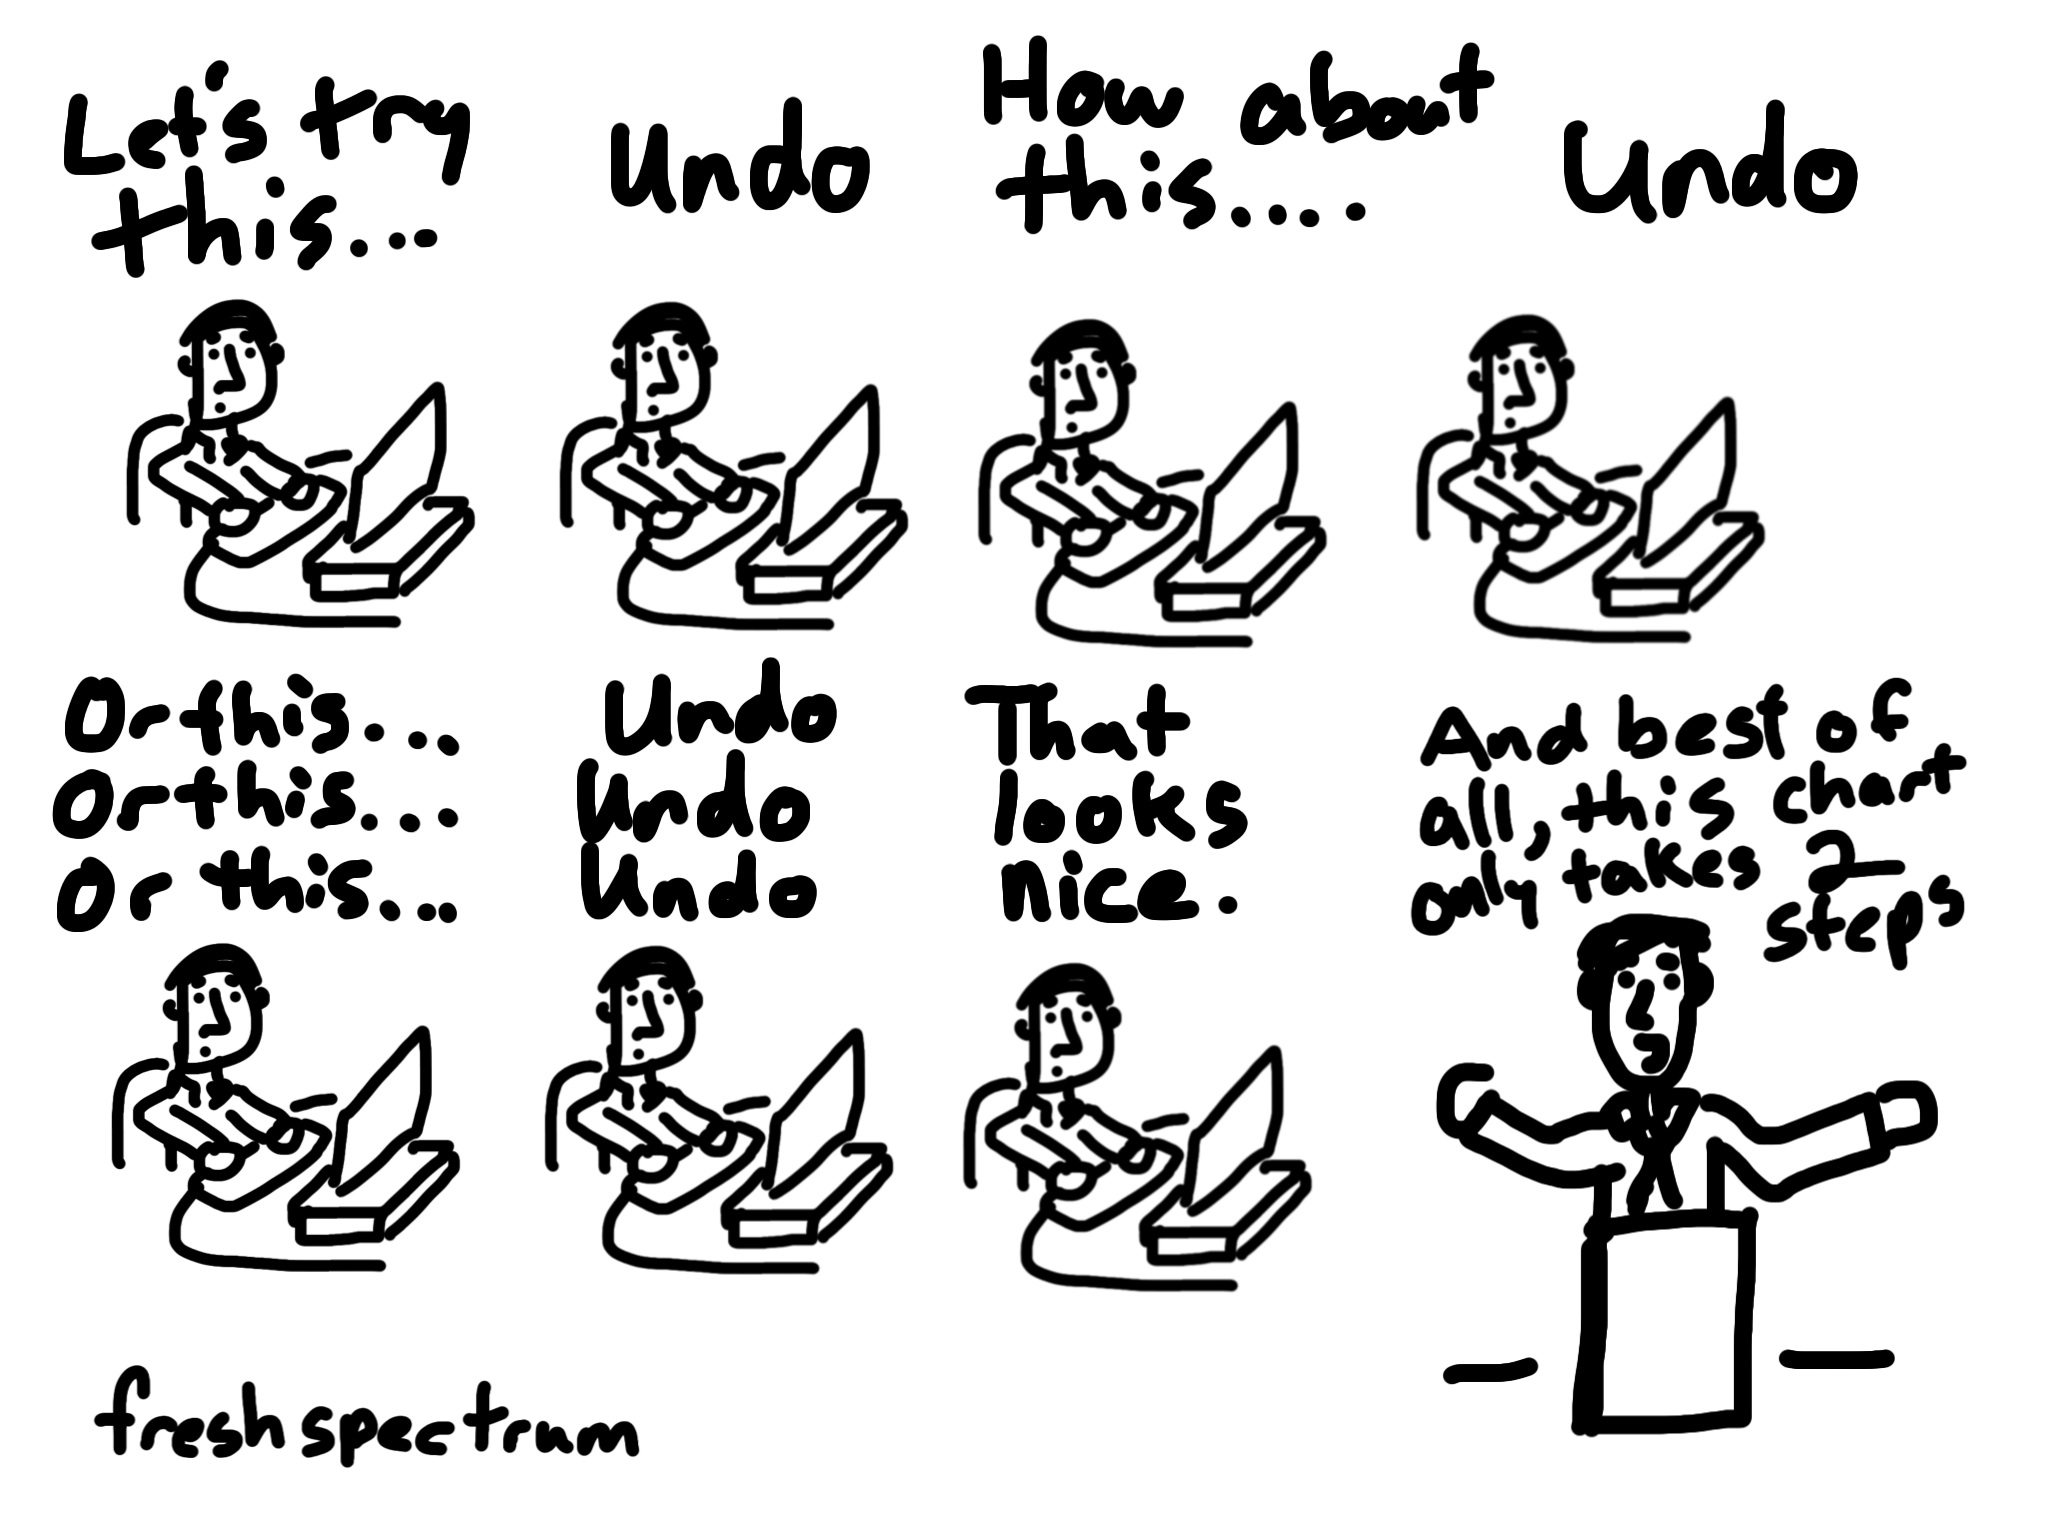 Cartoon showing a series of tries and undos but ending by saying it only took two steps.